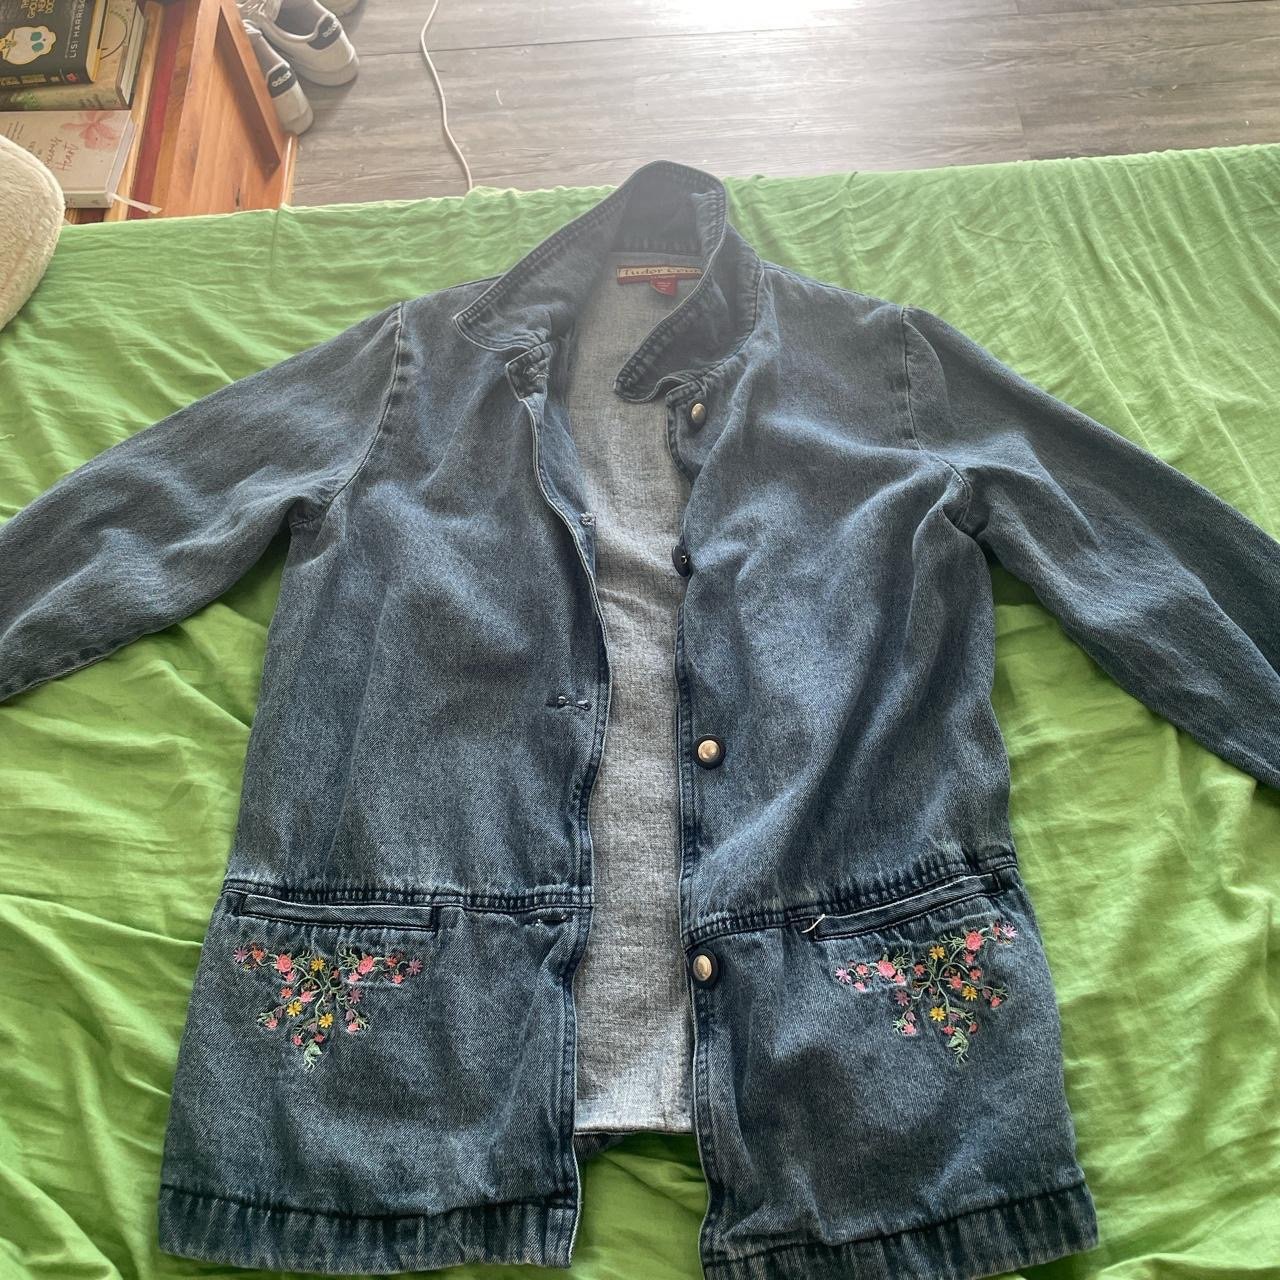 Wholesale price embroidered denim jacket nQ0W1Hq7y on sale